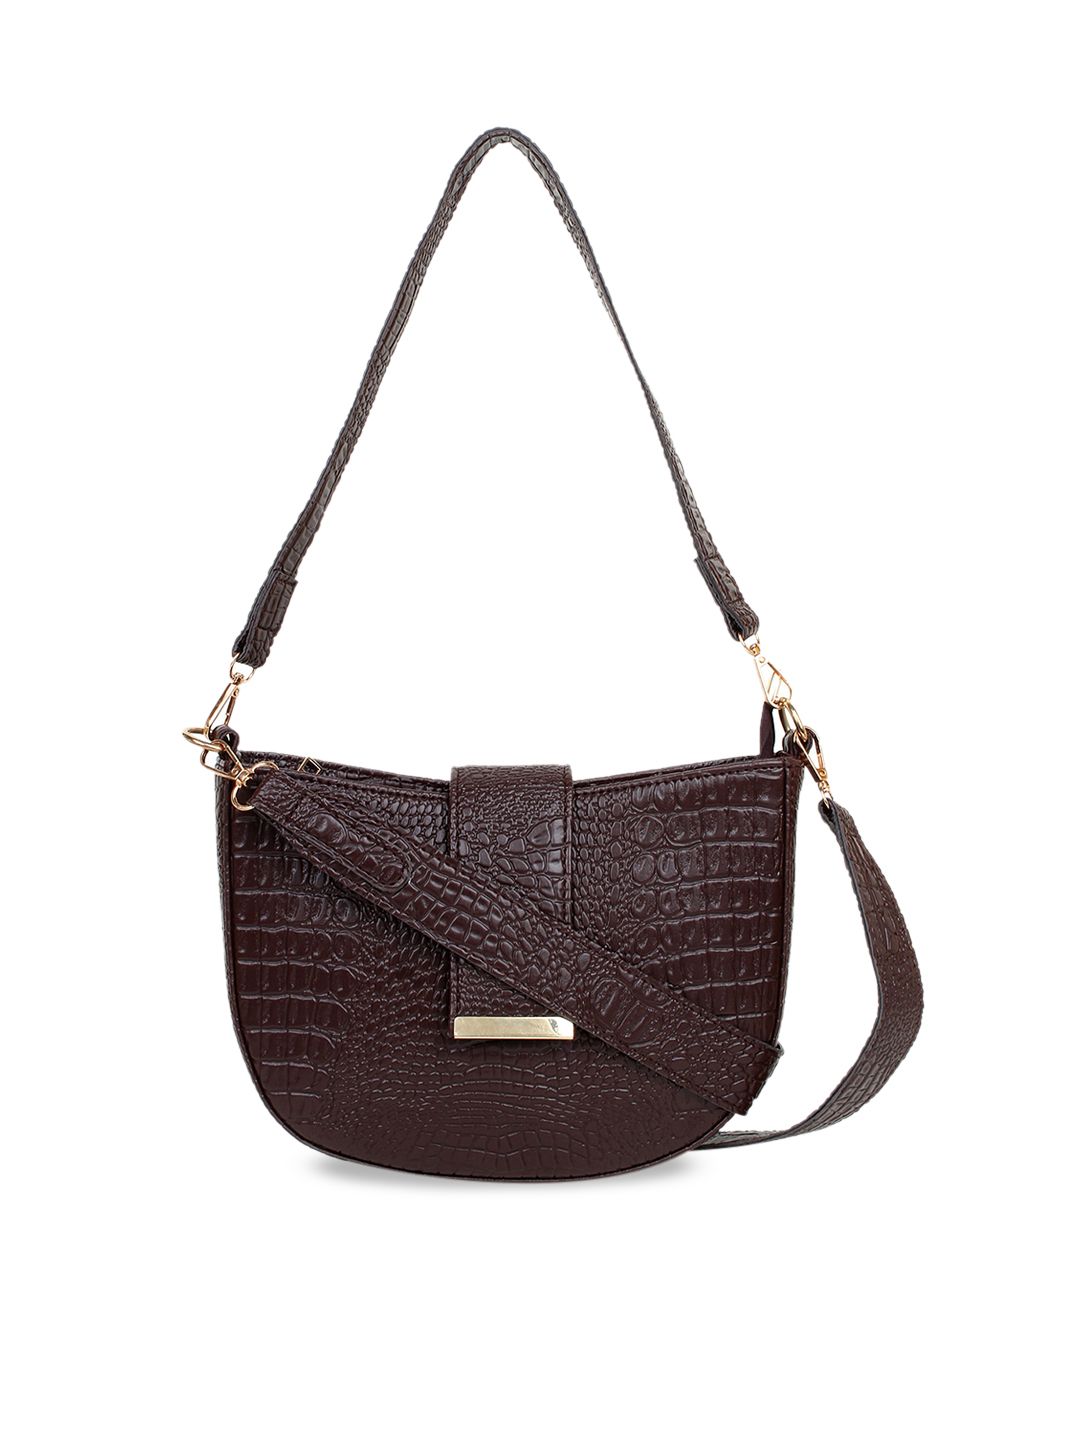 LEGAL BRIBE Brown Animal Textured PU Structured Fashion Price in India